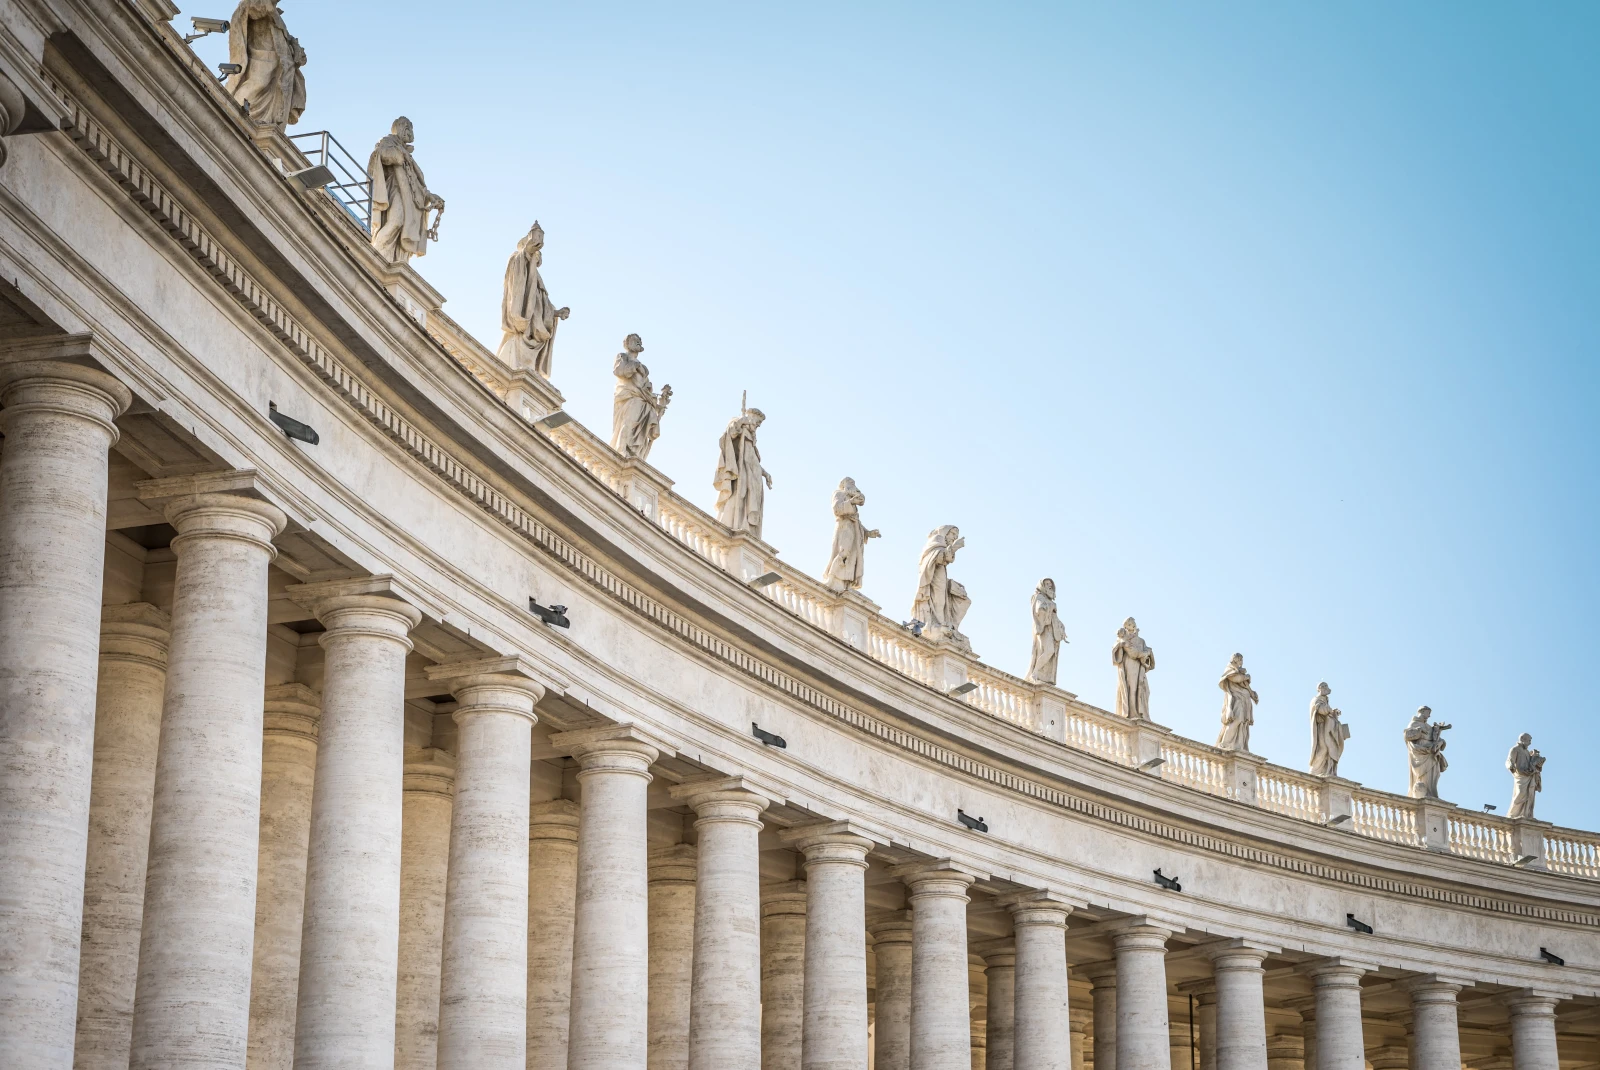 White statues and columns against a blue sky at the Vatican City in Italy.